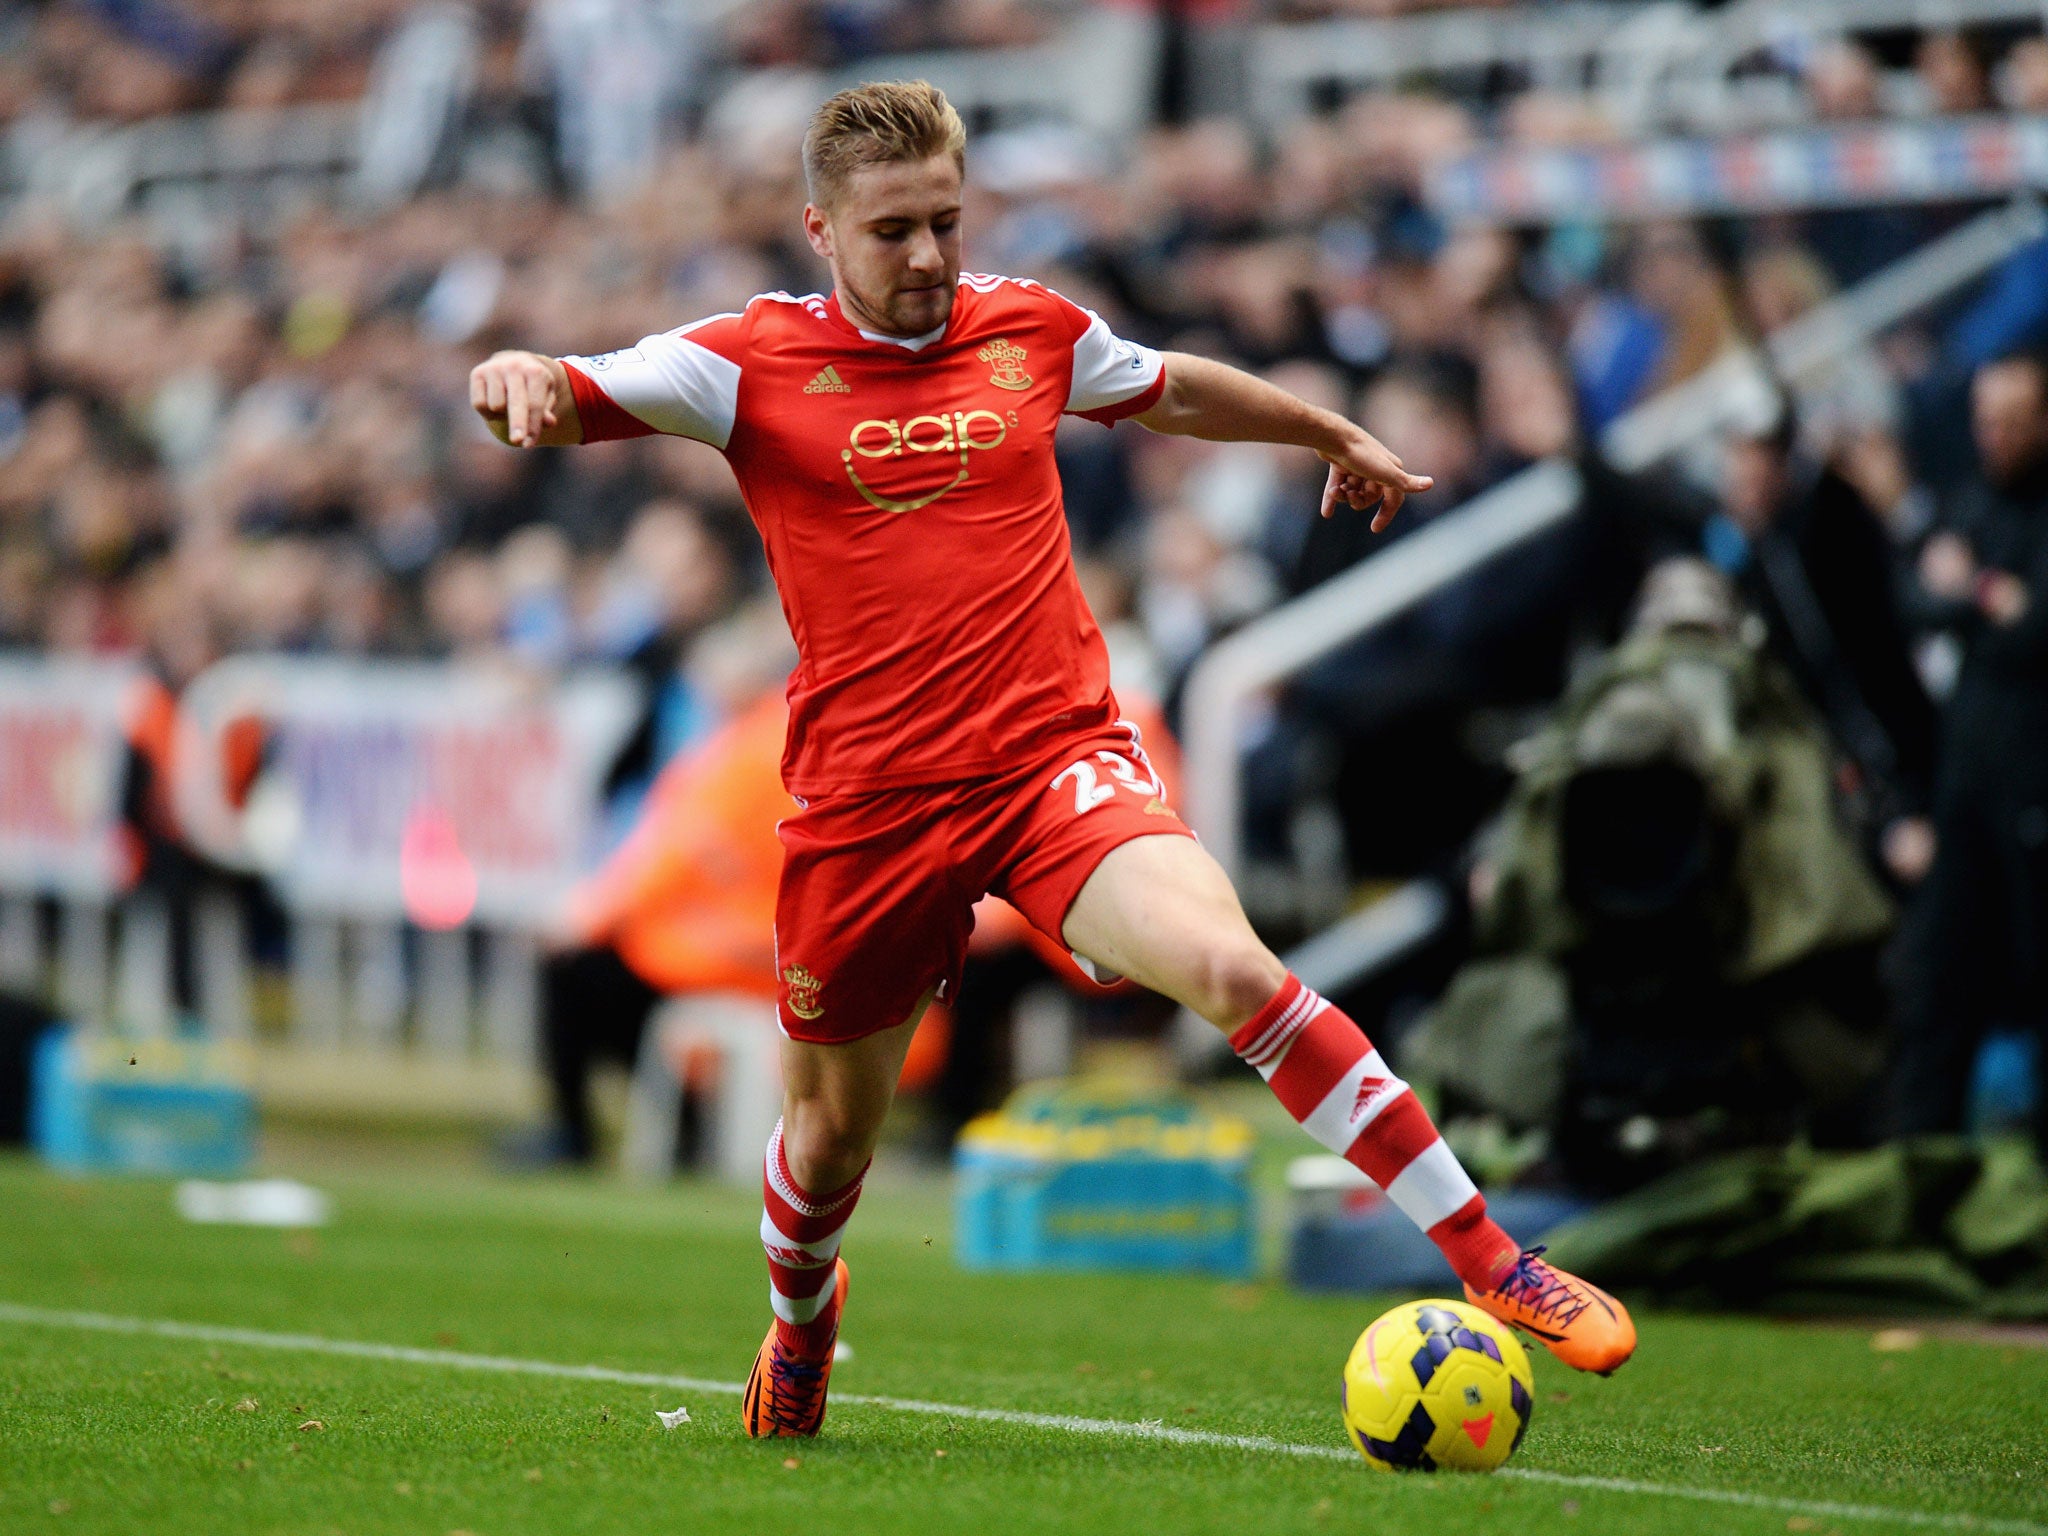 Southampton winger Luke Shaw charges down the wing